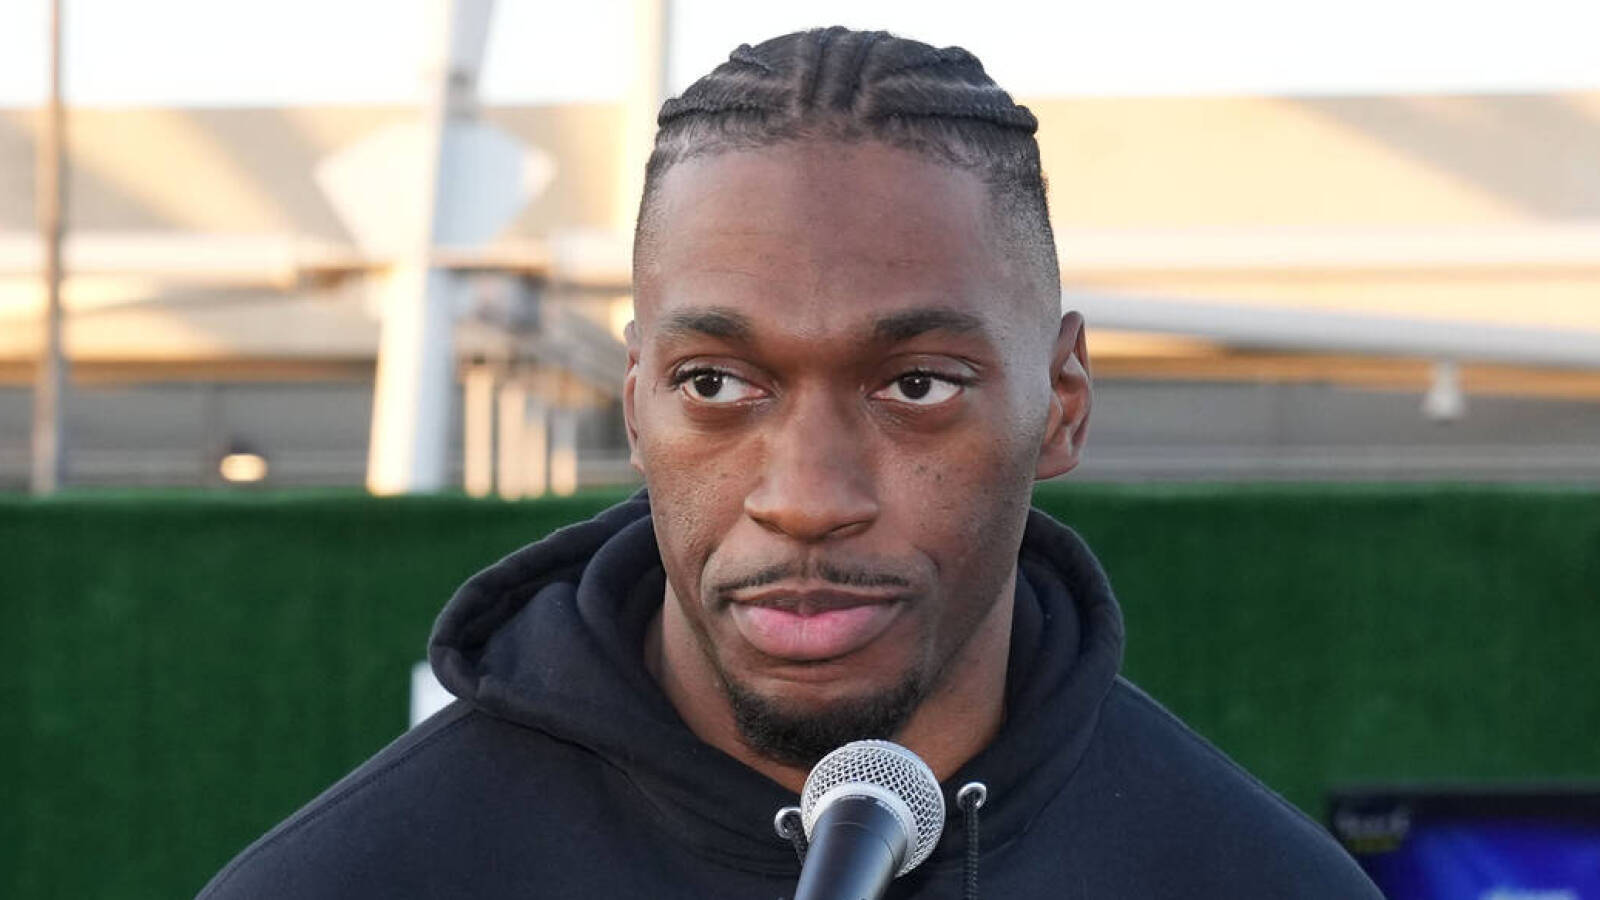 Robert Griffin III proves he's still very fast with latest 40 time